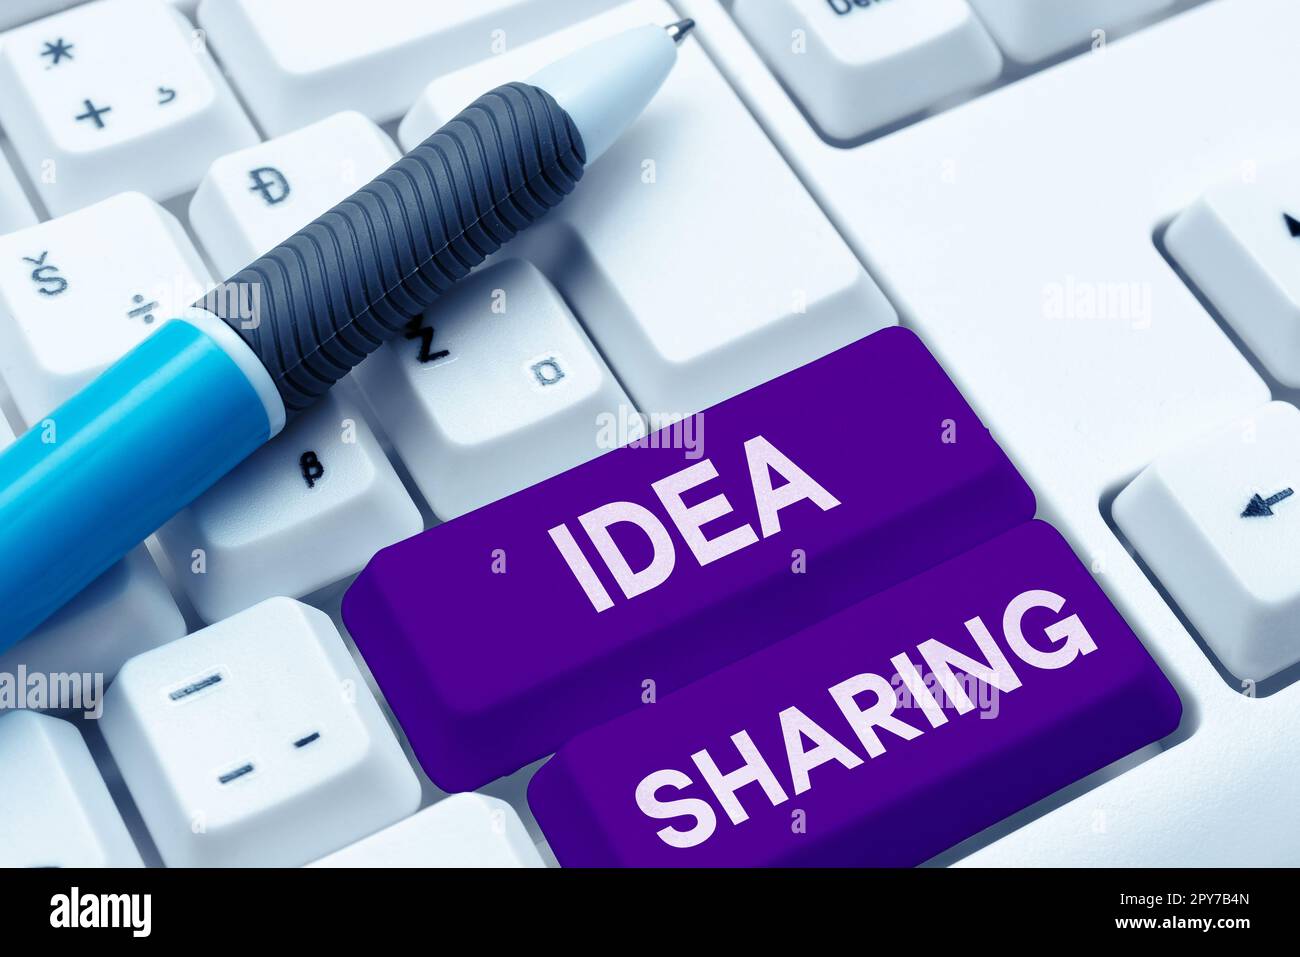 Text showing inspiration Idea Sharing. Business approach Startup launch innovation product, creative thinking Stock Photo